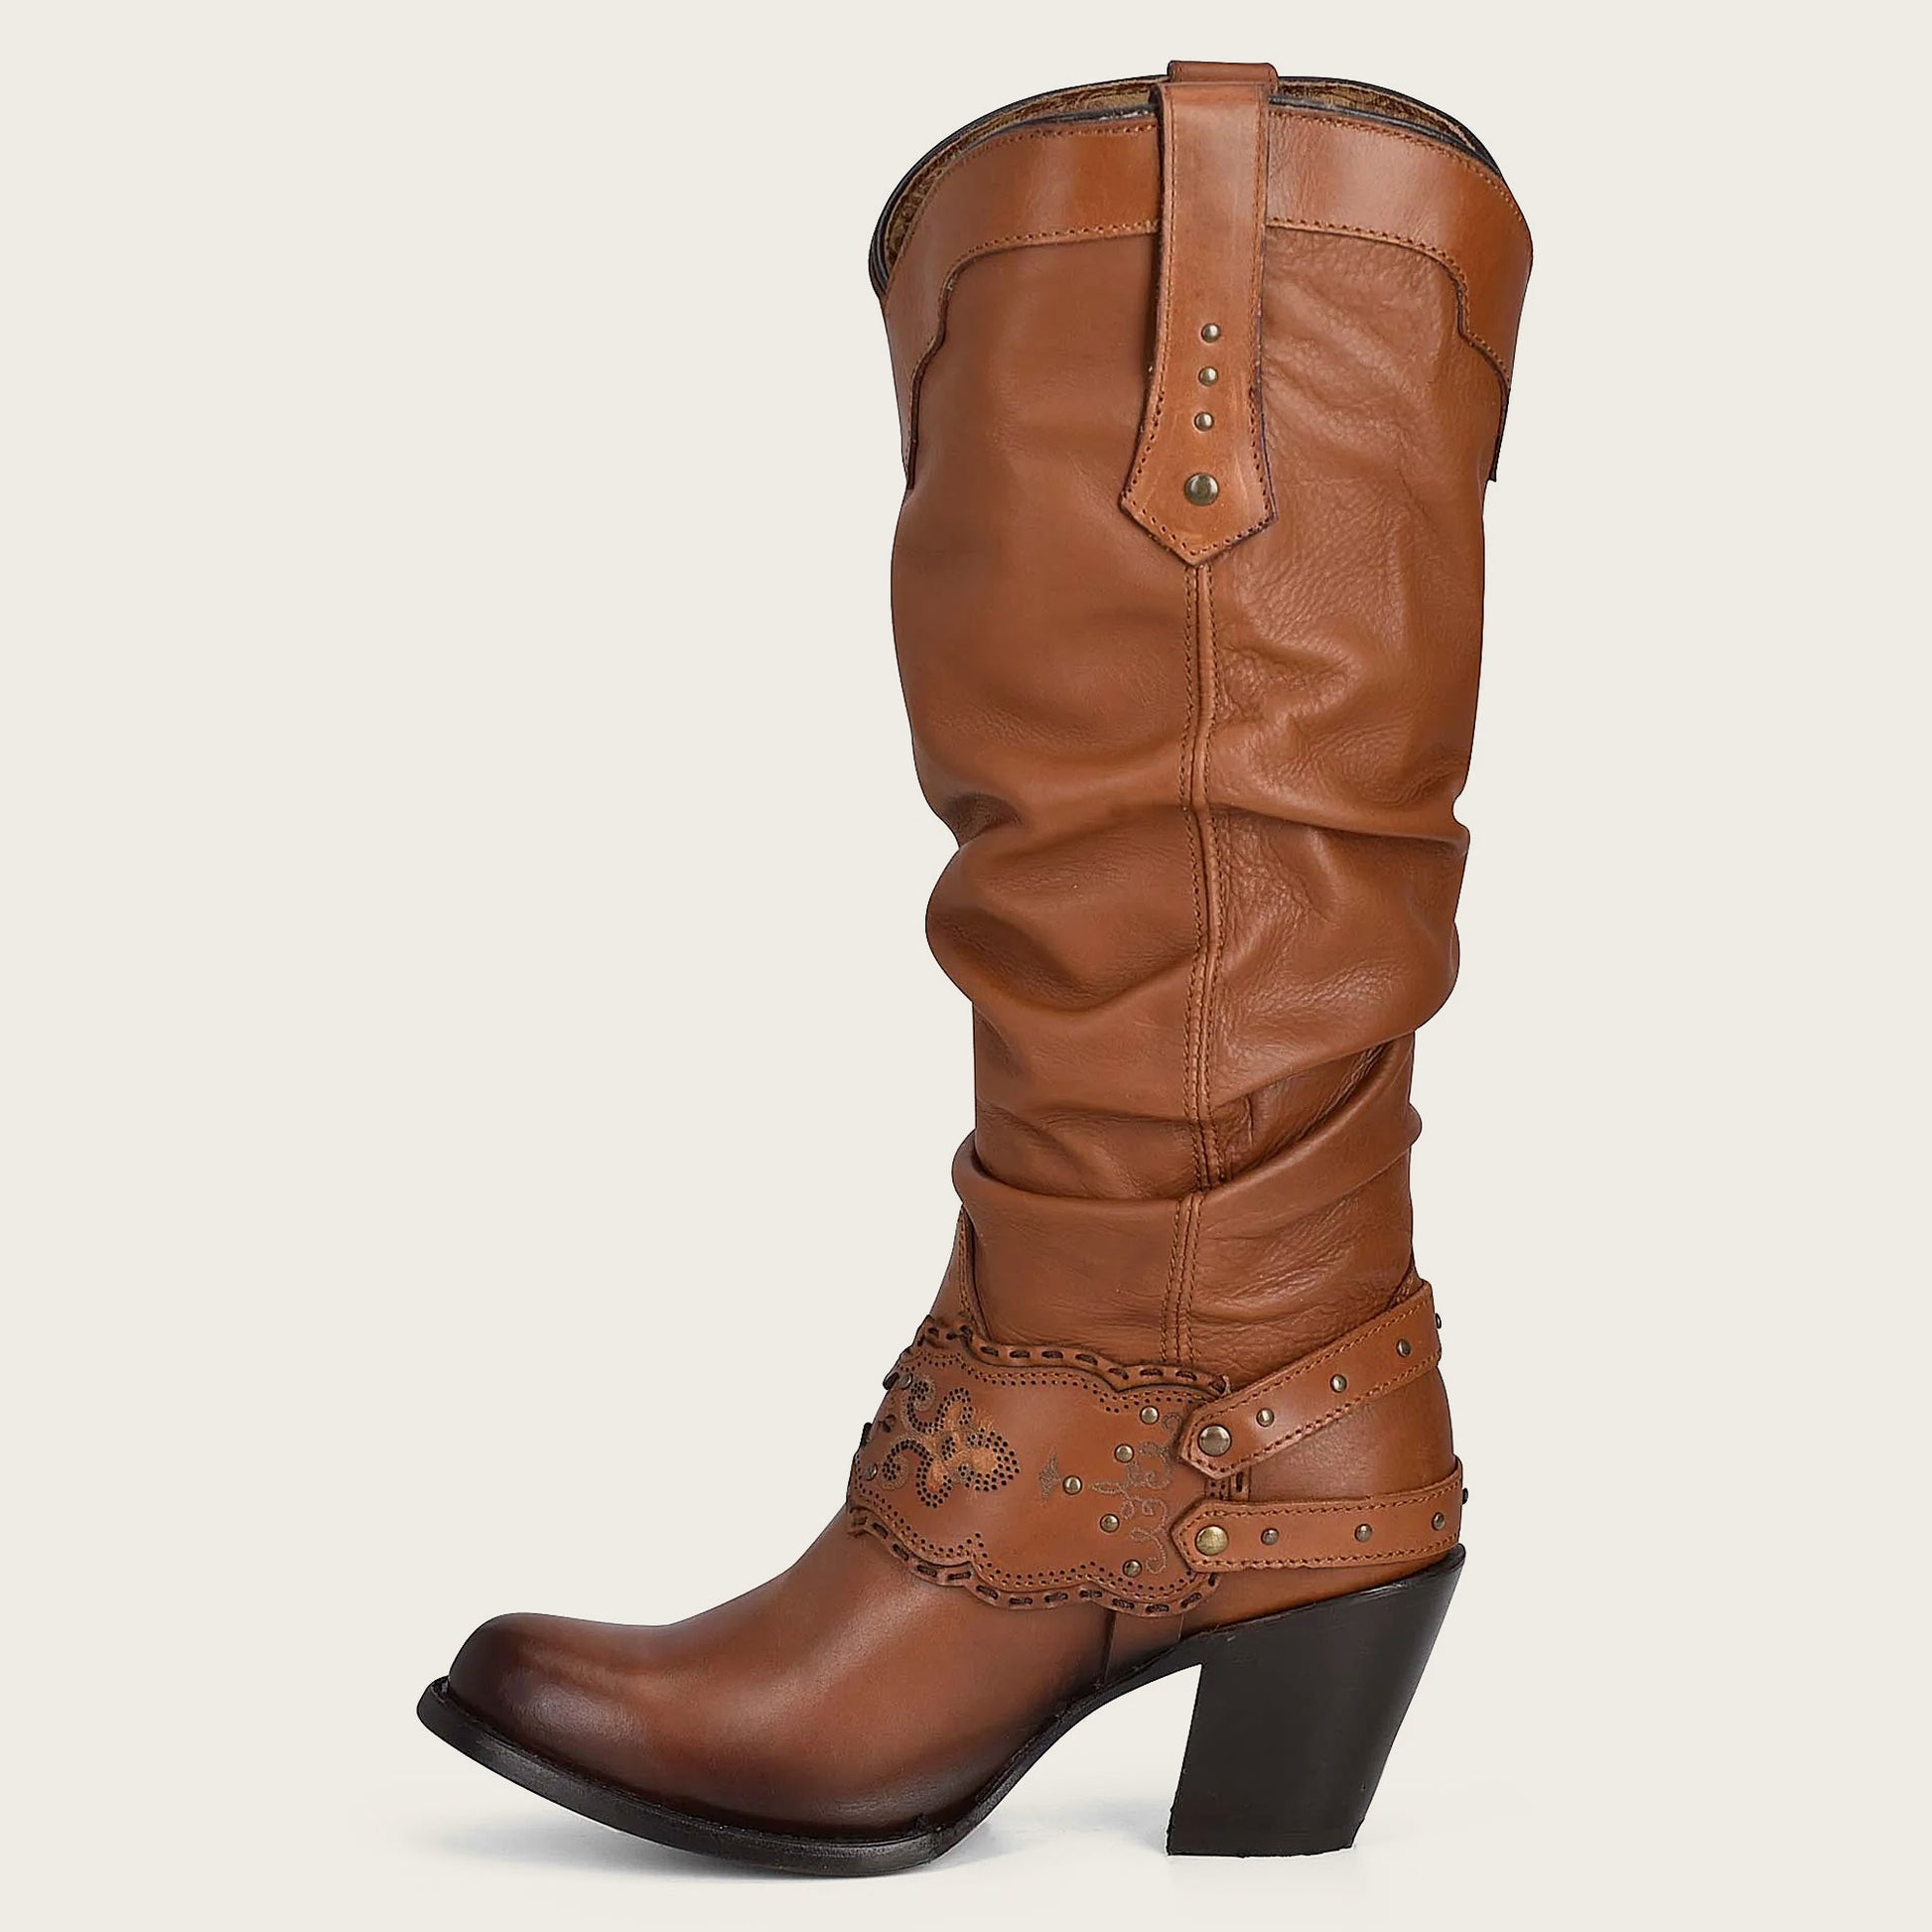 Make a bold statement and showcase your individuality with these eye-catching engraved honey leather tall boots.